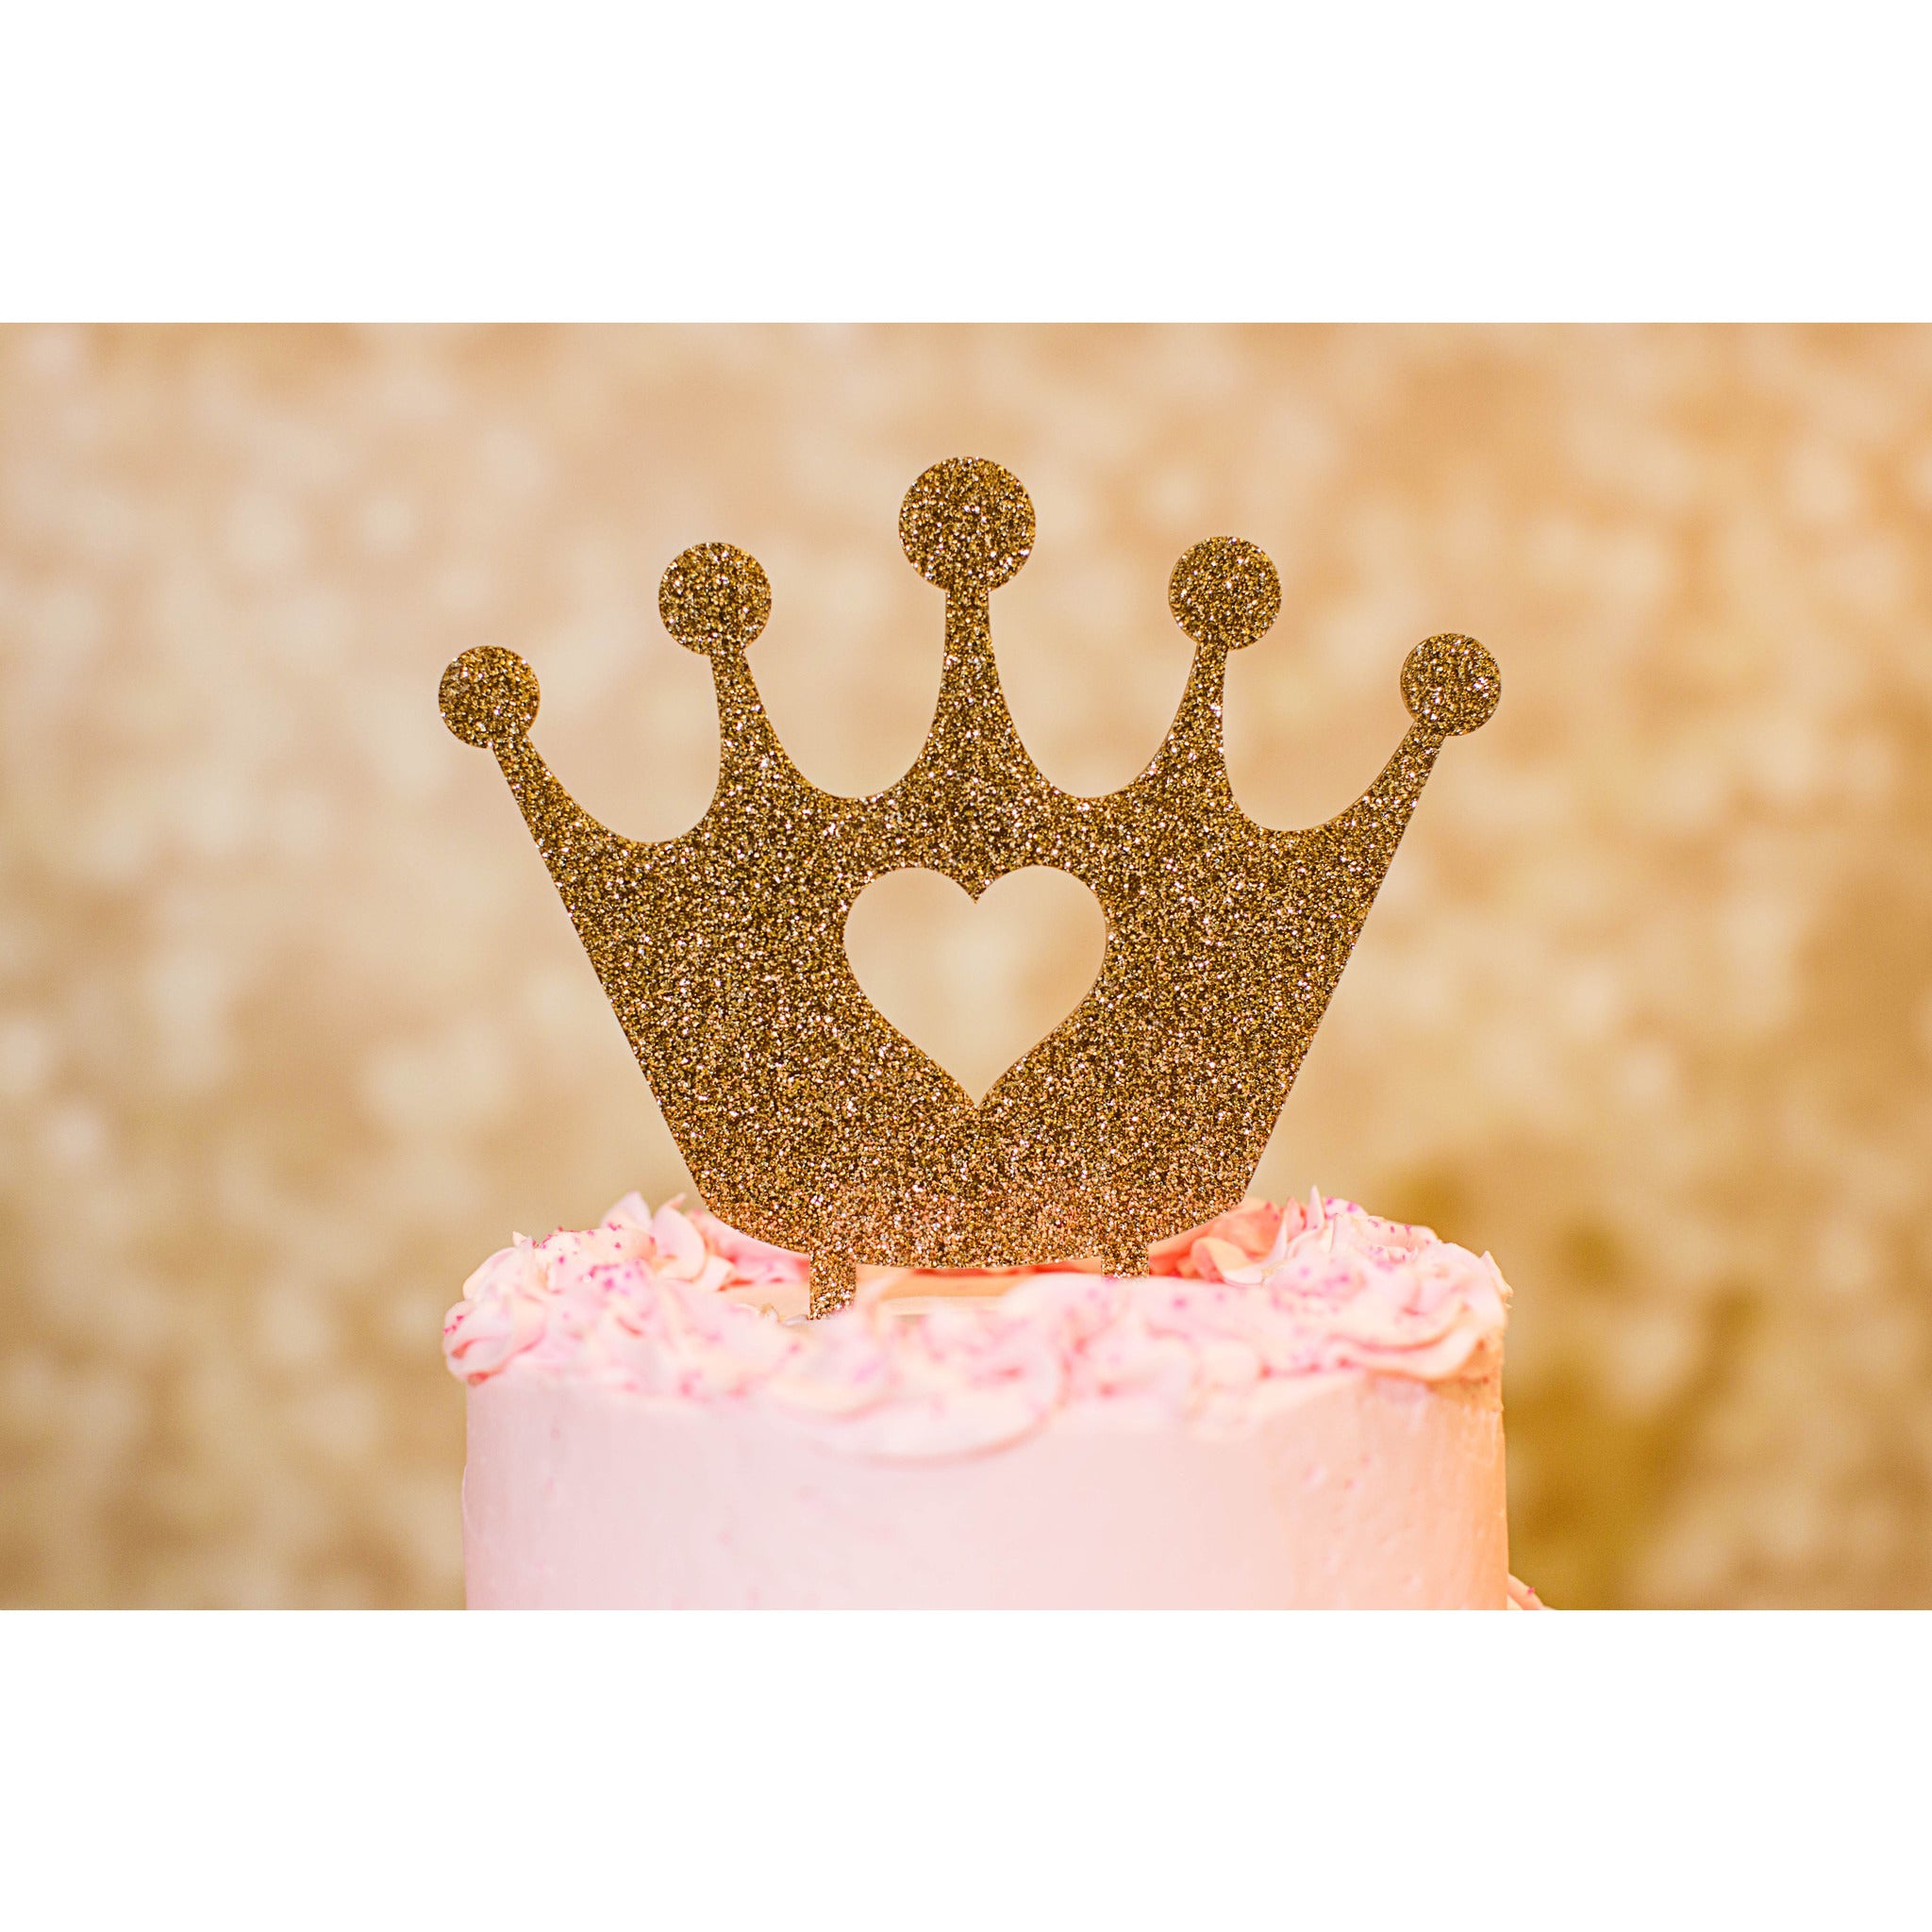 CREPUSCOLO Crown Cake Topper, Vintage Tiara Crown Cake Topper Baby Shower  Birthday Cake Decoration Small Baby Crown for Boys & Girls, Metal (Gold)